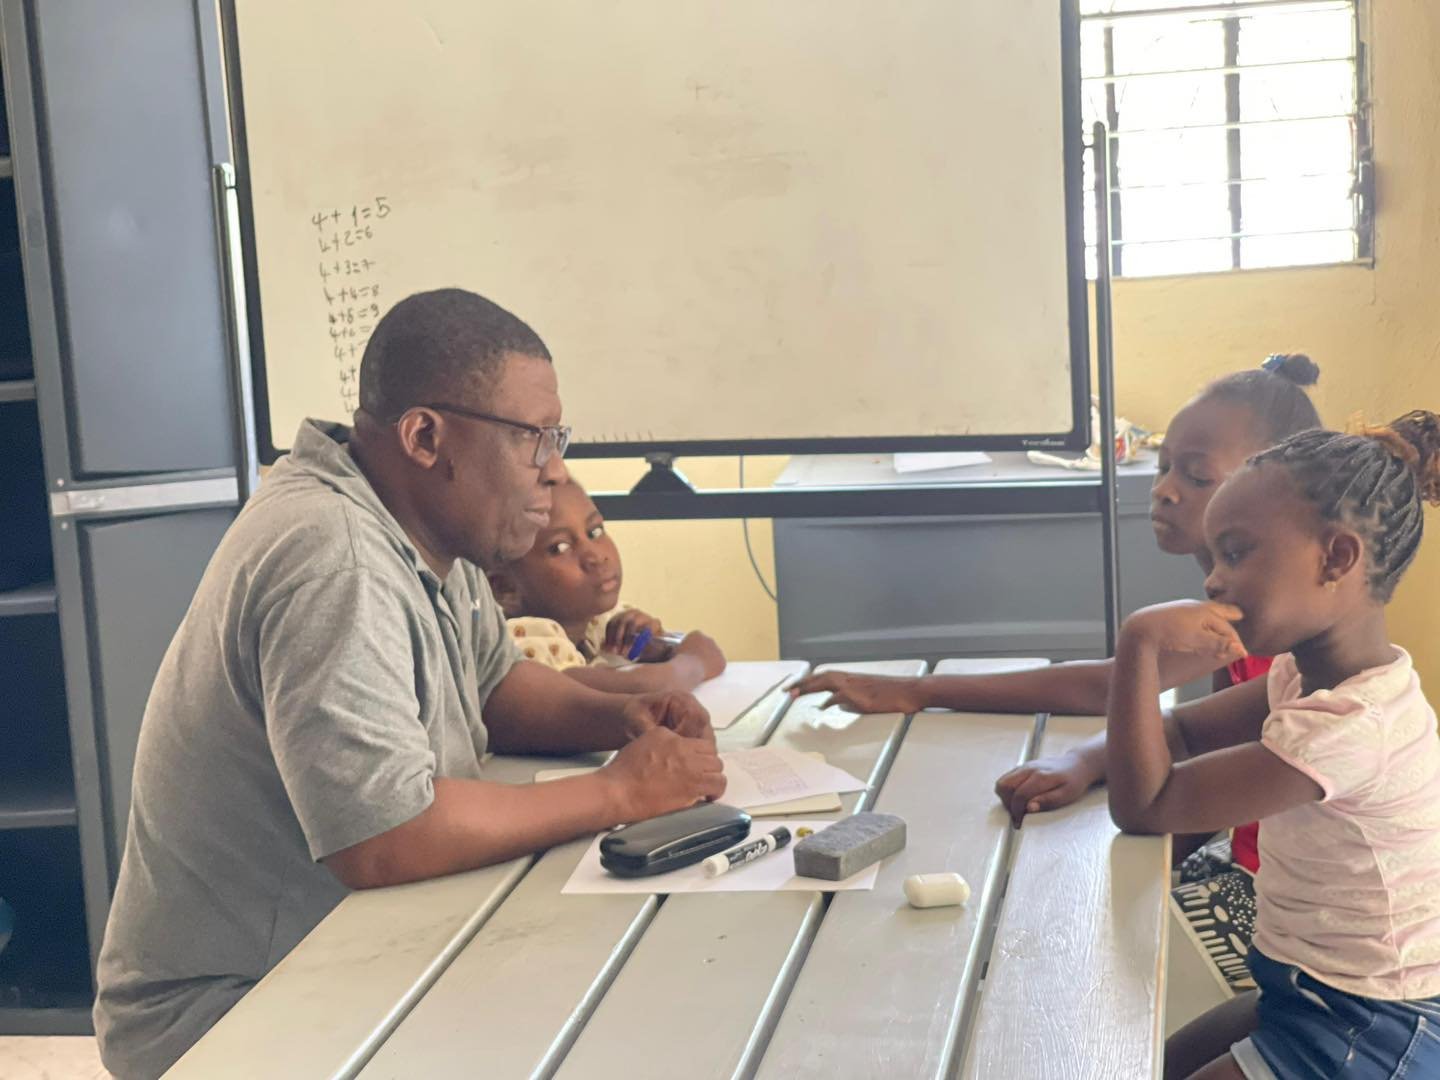 Schools are closed and have been for weeks, but staff members like Fre Jacques are committed to helping the children of CCS continue to learn and grow.

#haitiawake #haiti #gospel #hope #relationships #glwapoubondye